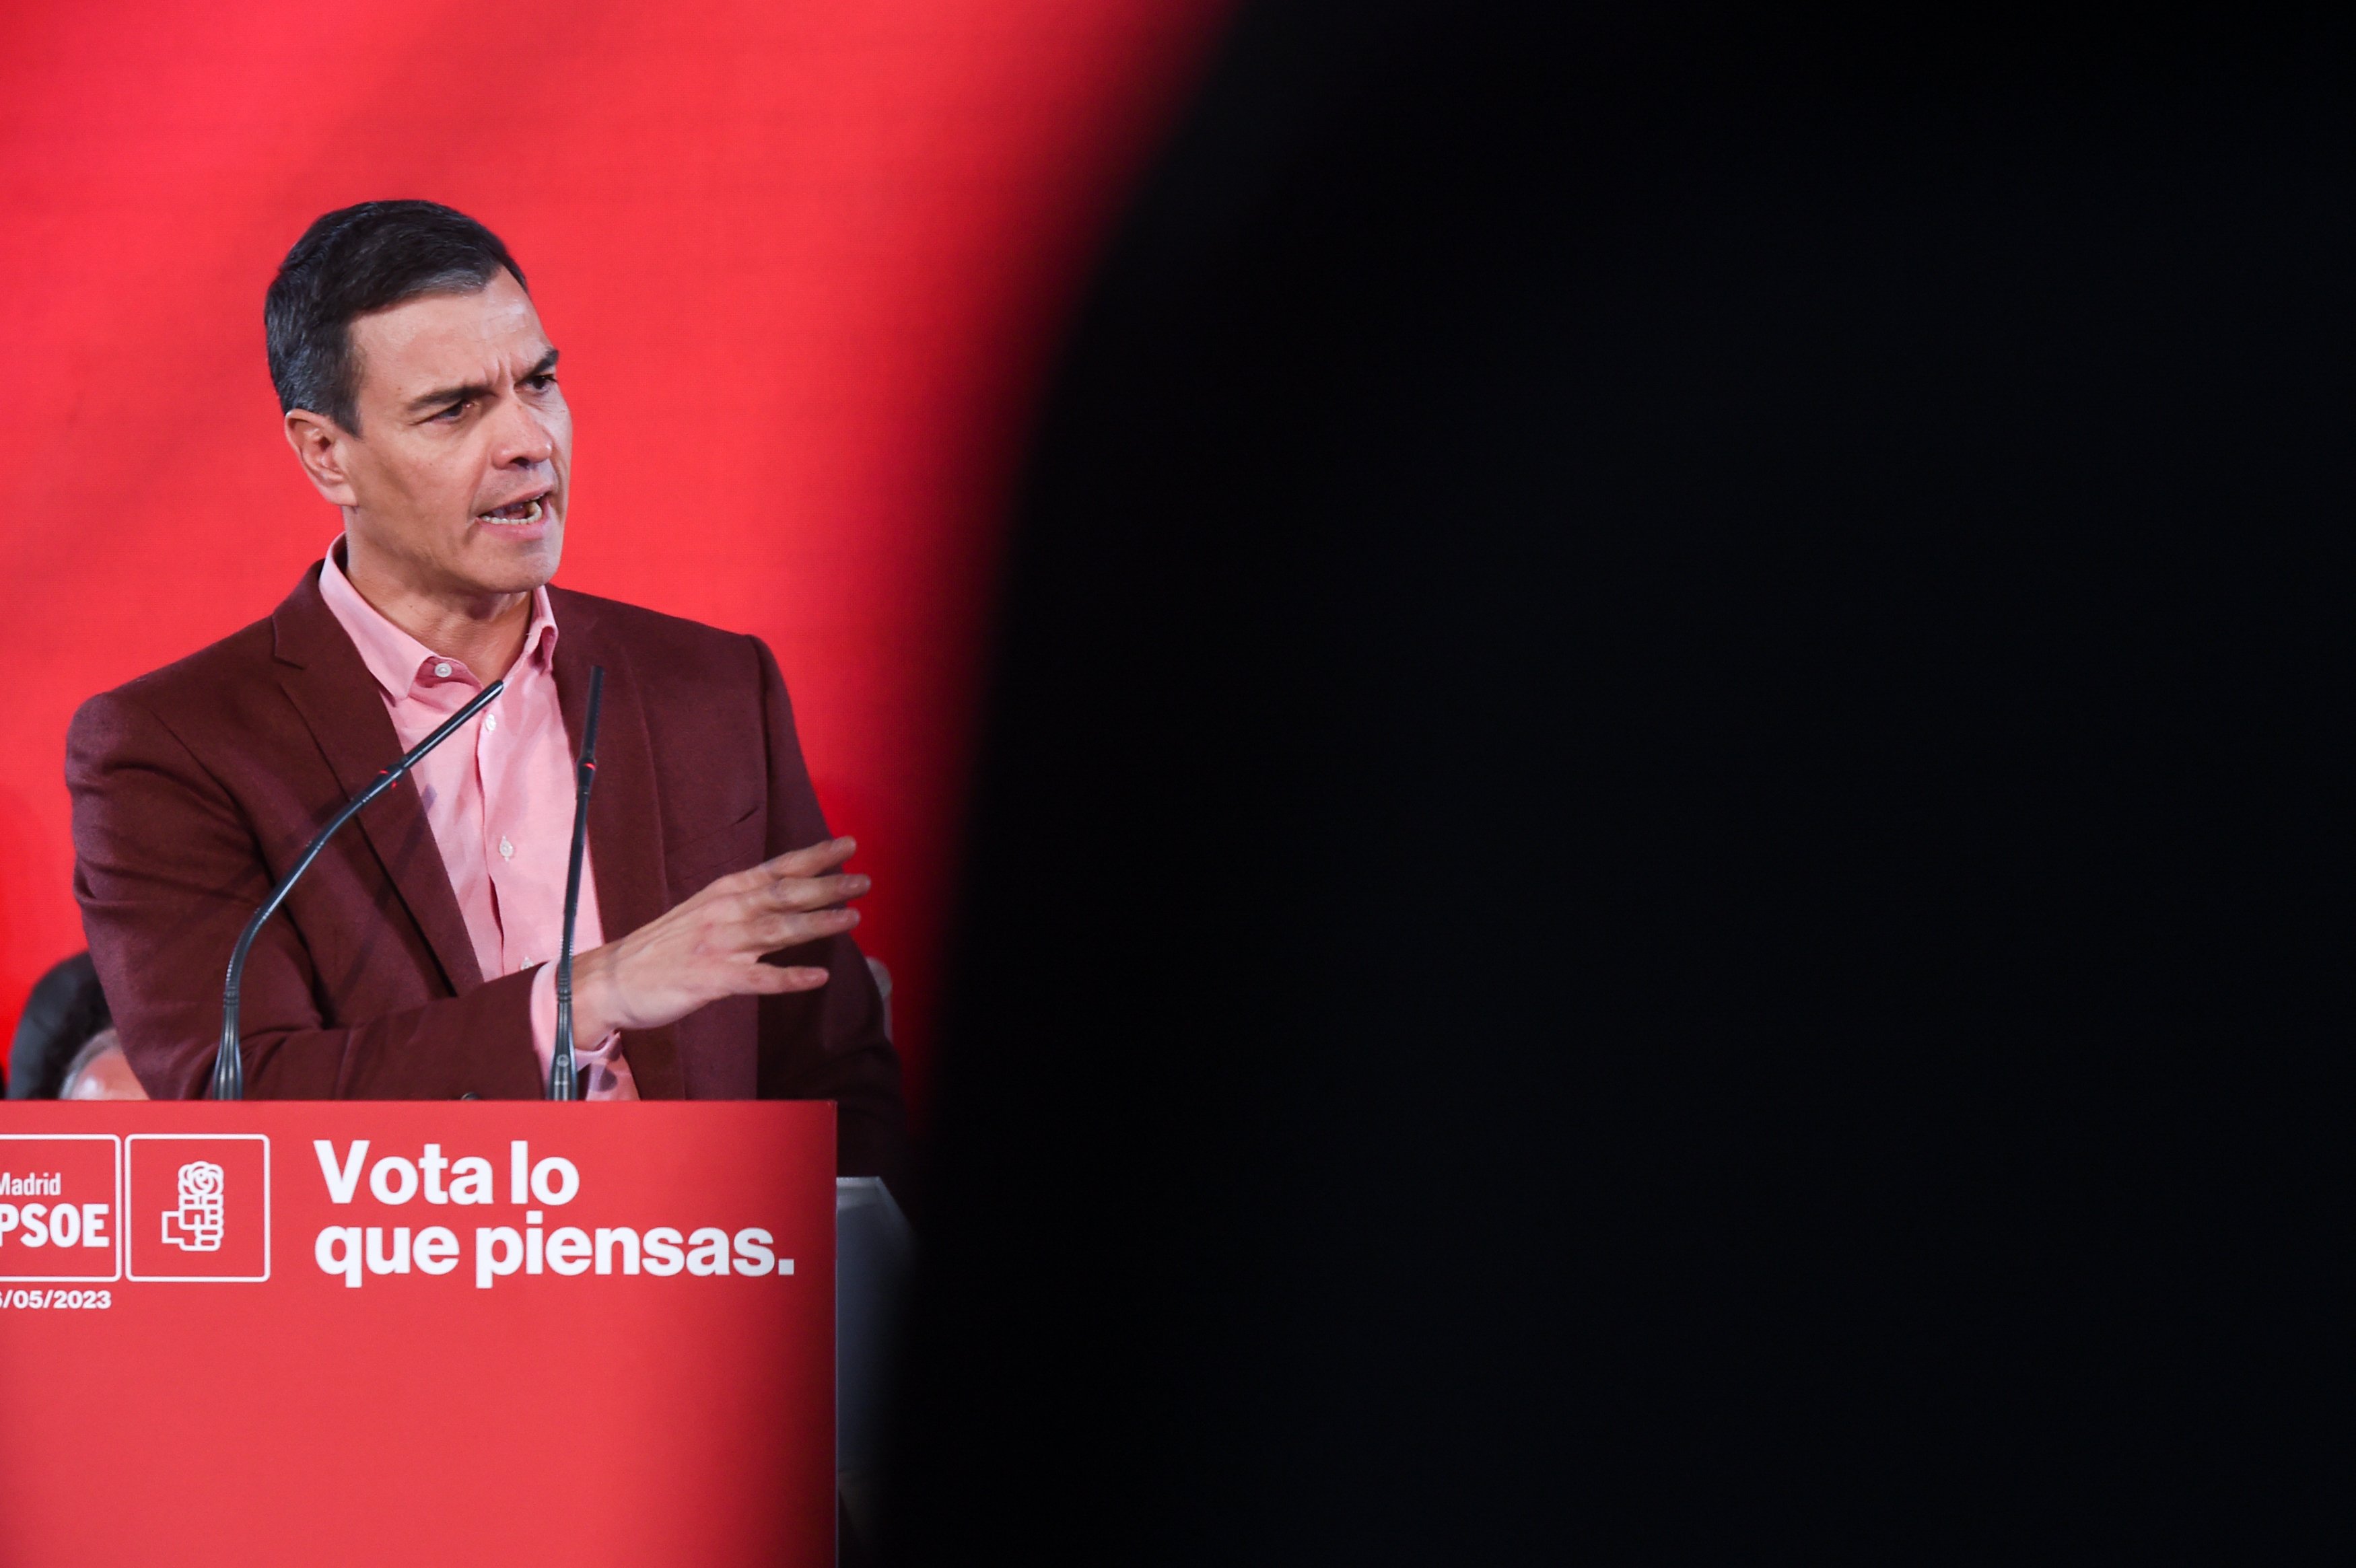 Pedro Sánchez cuts down on meetings and goes all out on media clashes